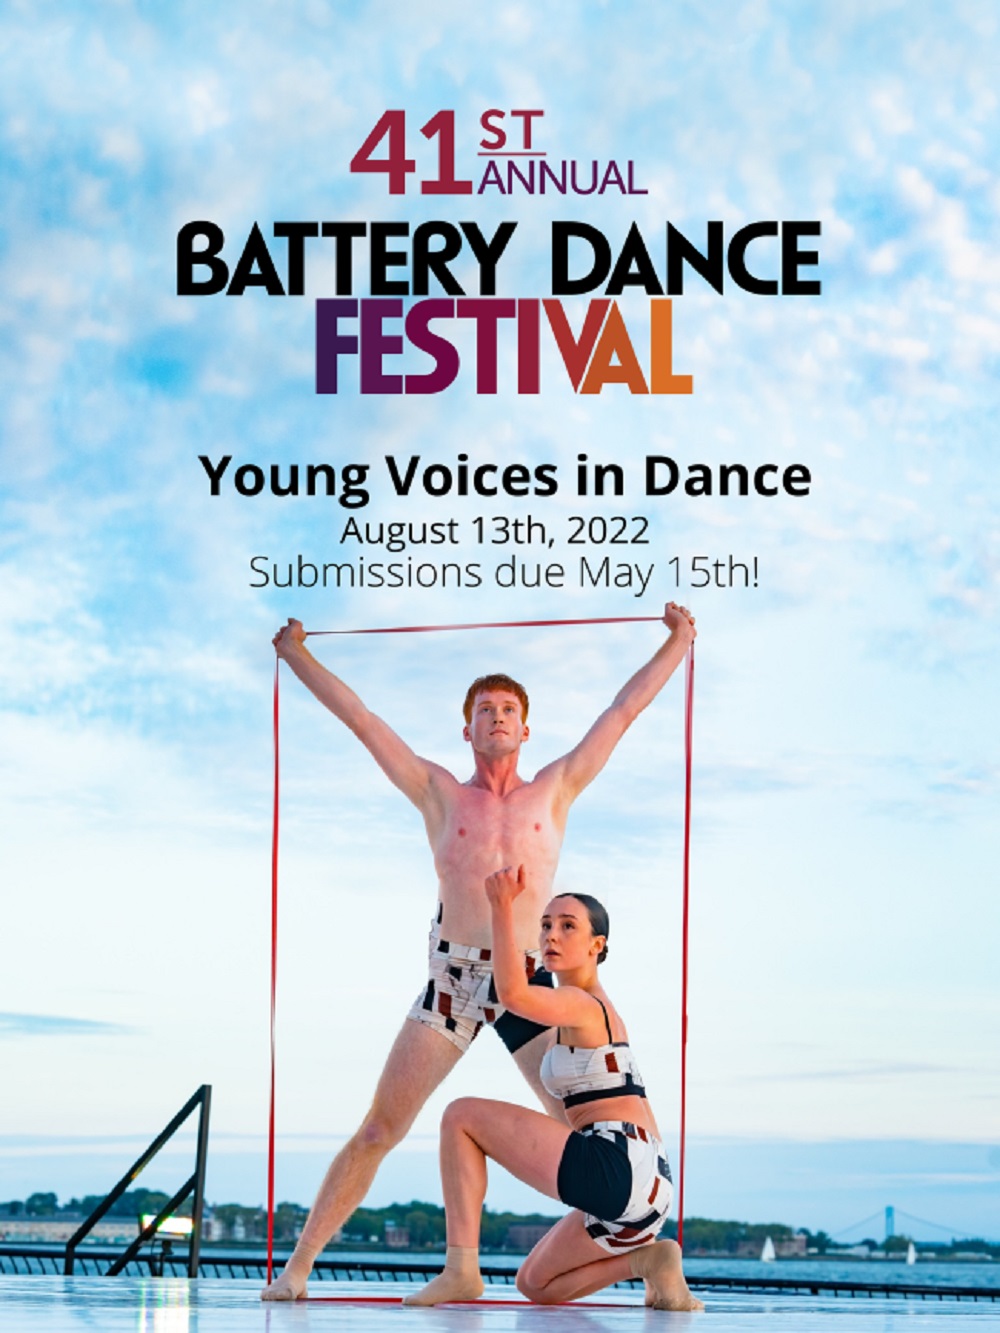 Battery Dance Now Accepting Applications for its Newest Addition: Young Voices in Dance